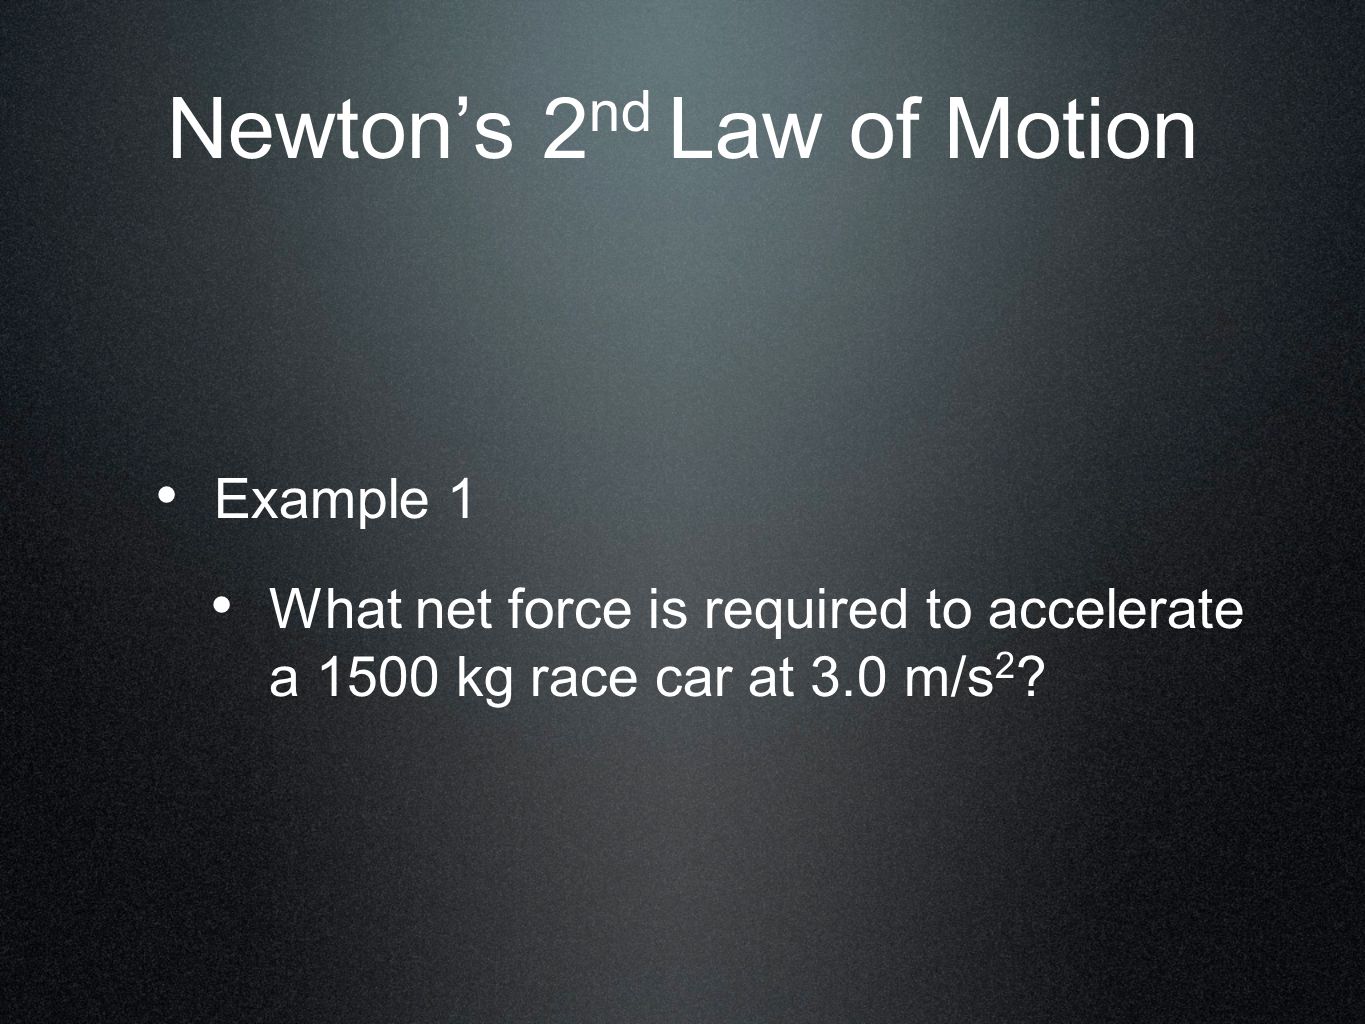 Newton’s 2 nd Law of Motion Example 1 What net force is required to accelerate a 1500 kg race car at 3.0 m/s 2